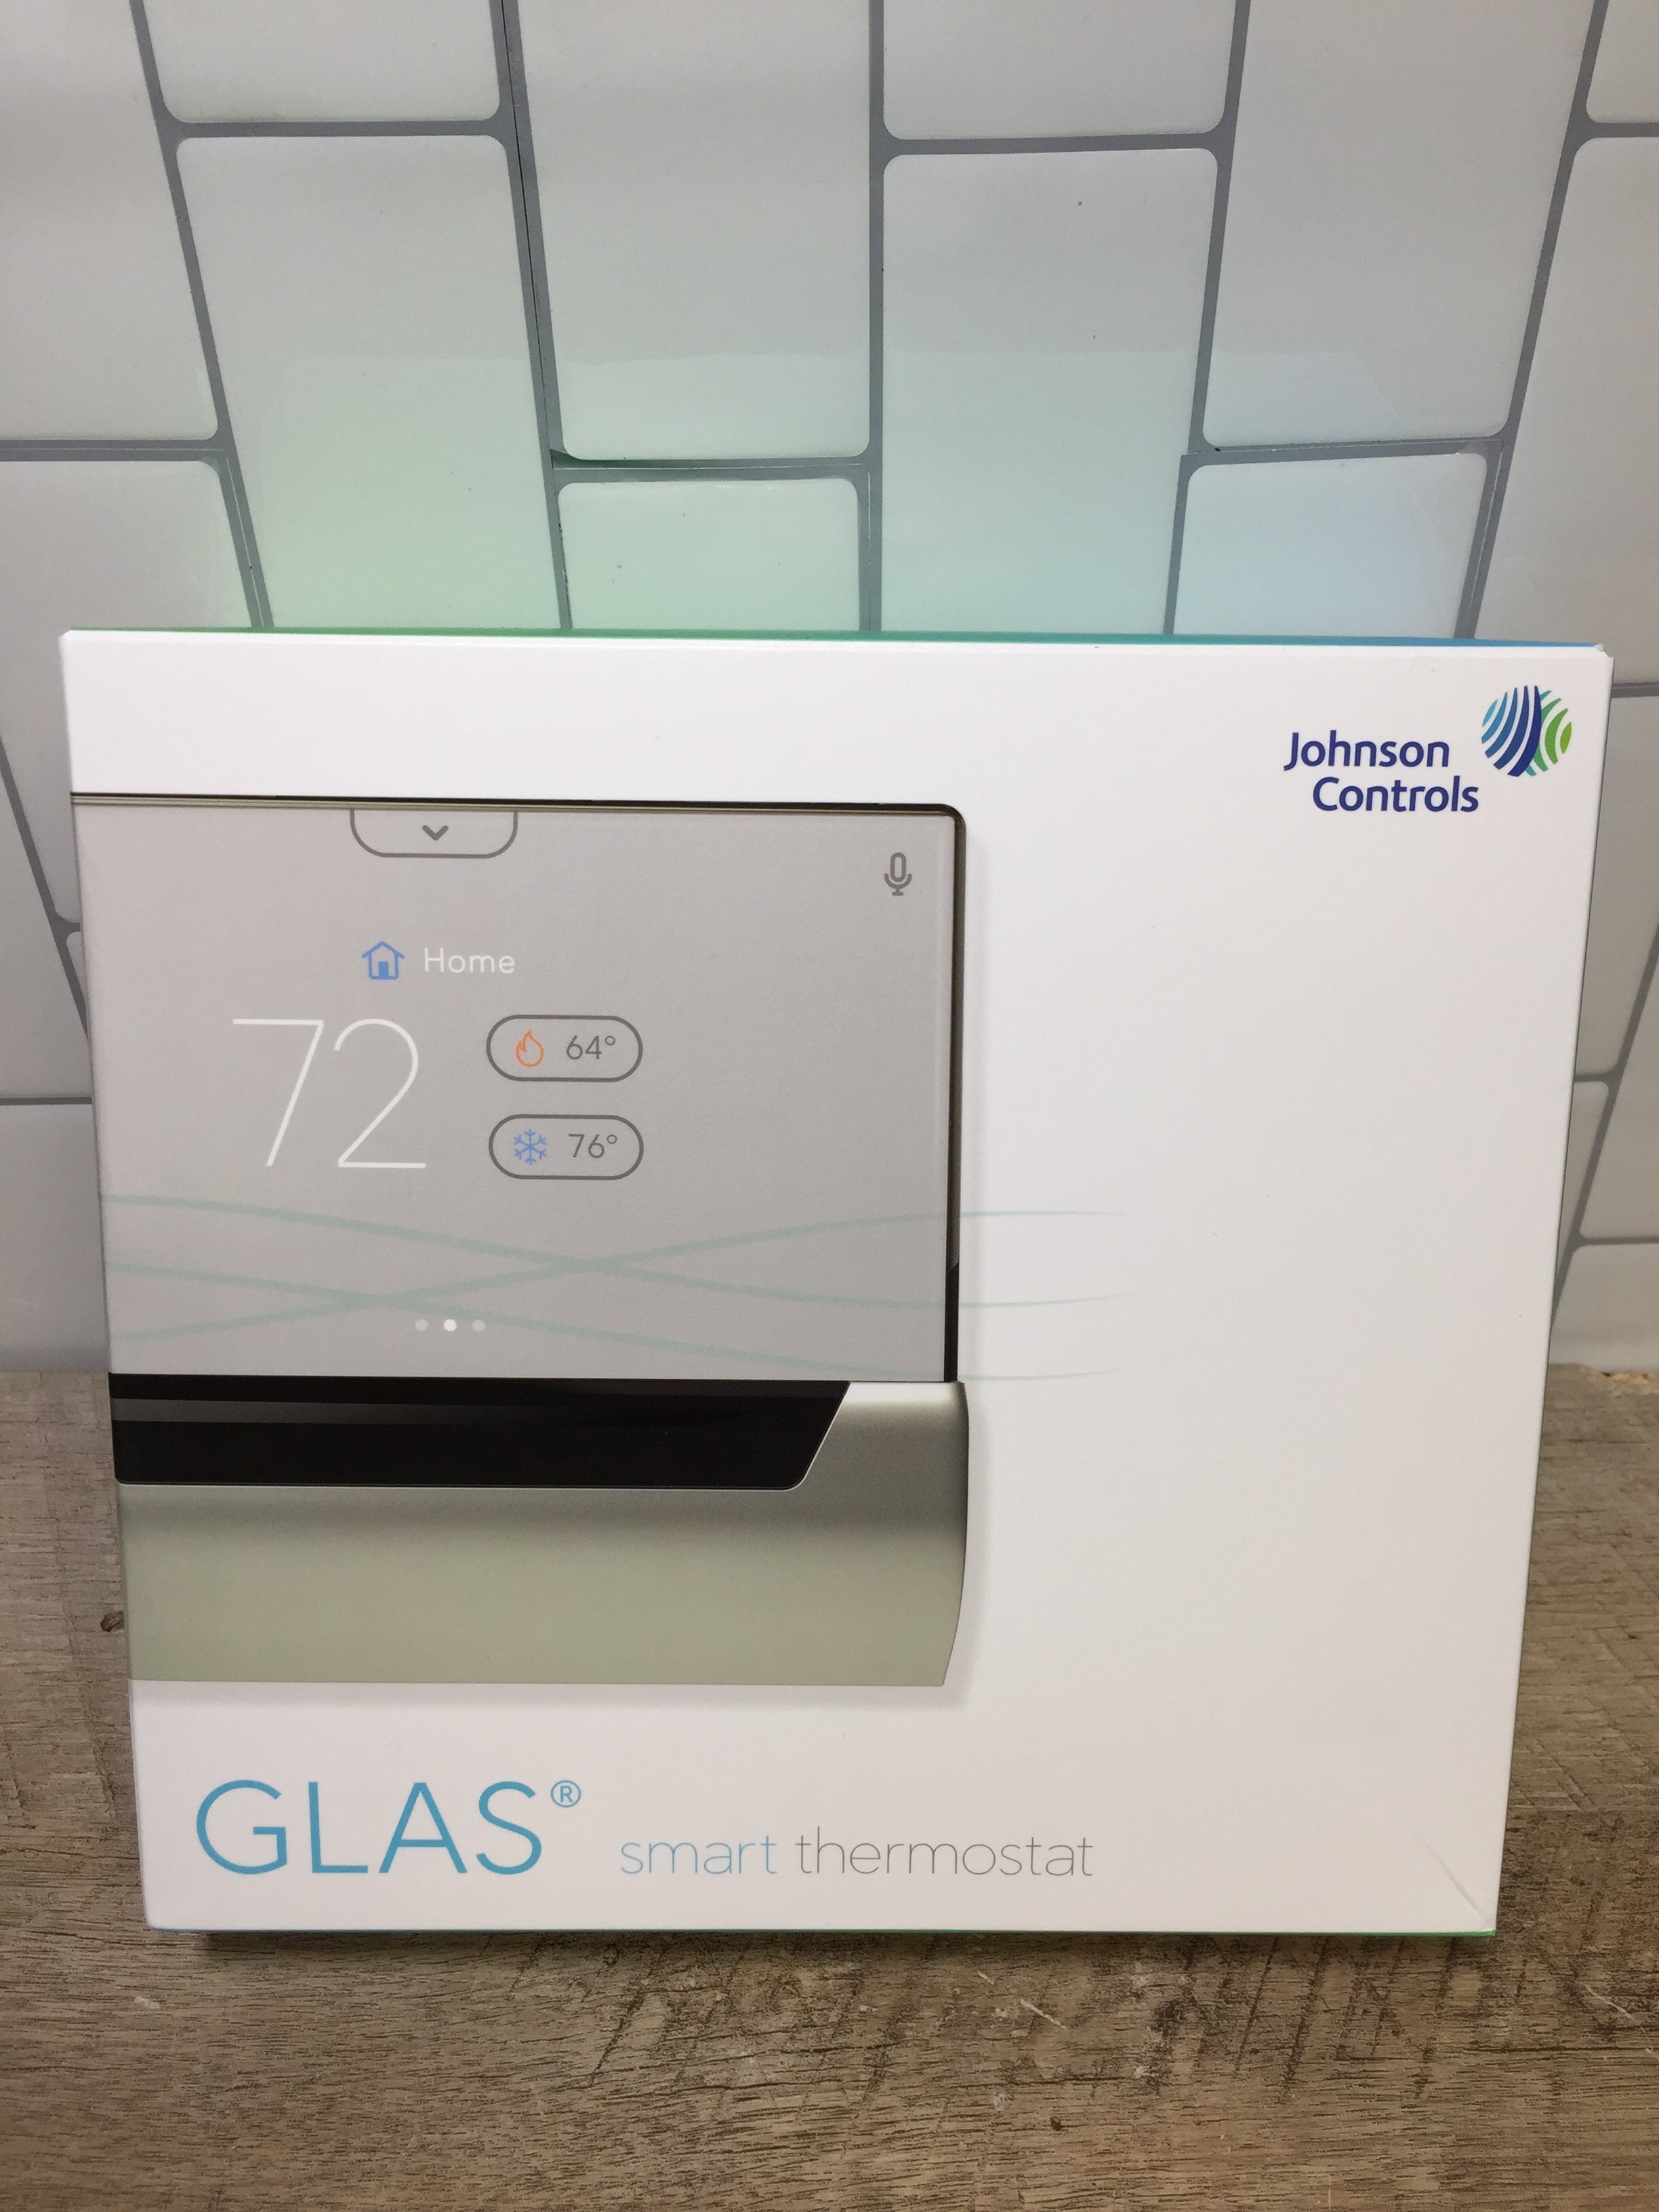 GLAS Smart Thermostat by Johnson Controls, Translucent OLED Touchscreen (7342139015406)